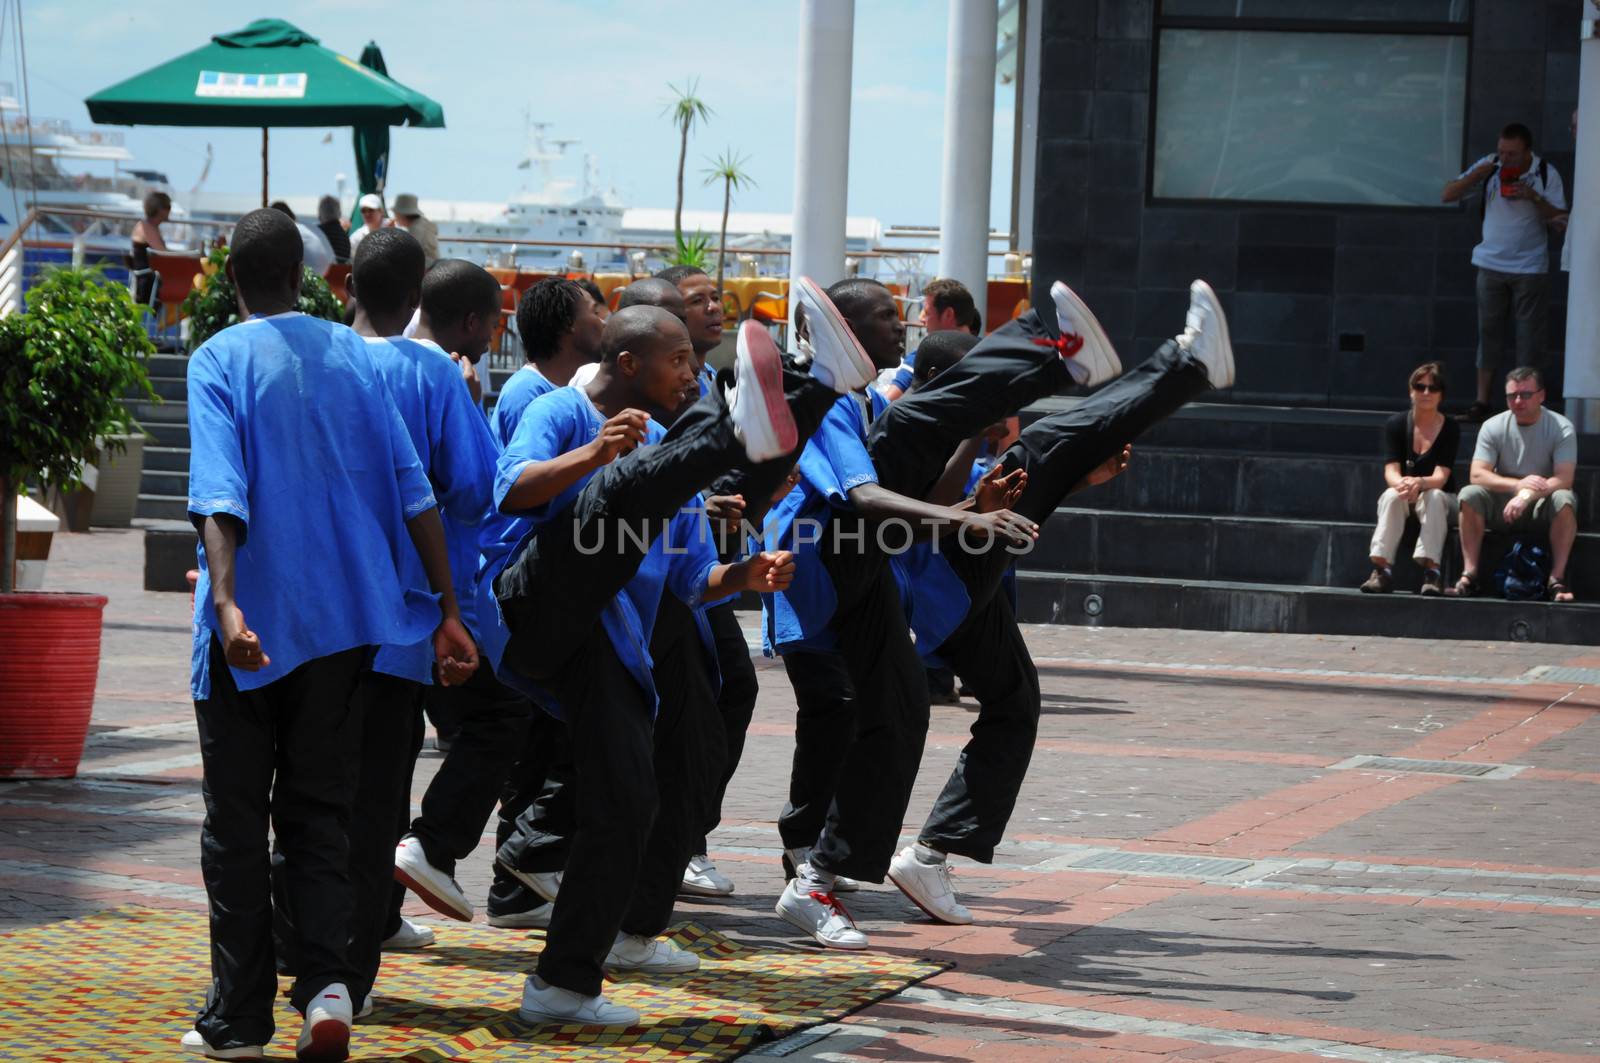 CAPE TOWN, SOUTH AFRICA - FEB 19: The Abonwabisi Brothers popular singing street band performs on the Waterfront on Feb 19, 2009 in Cape Town, South Africa. 